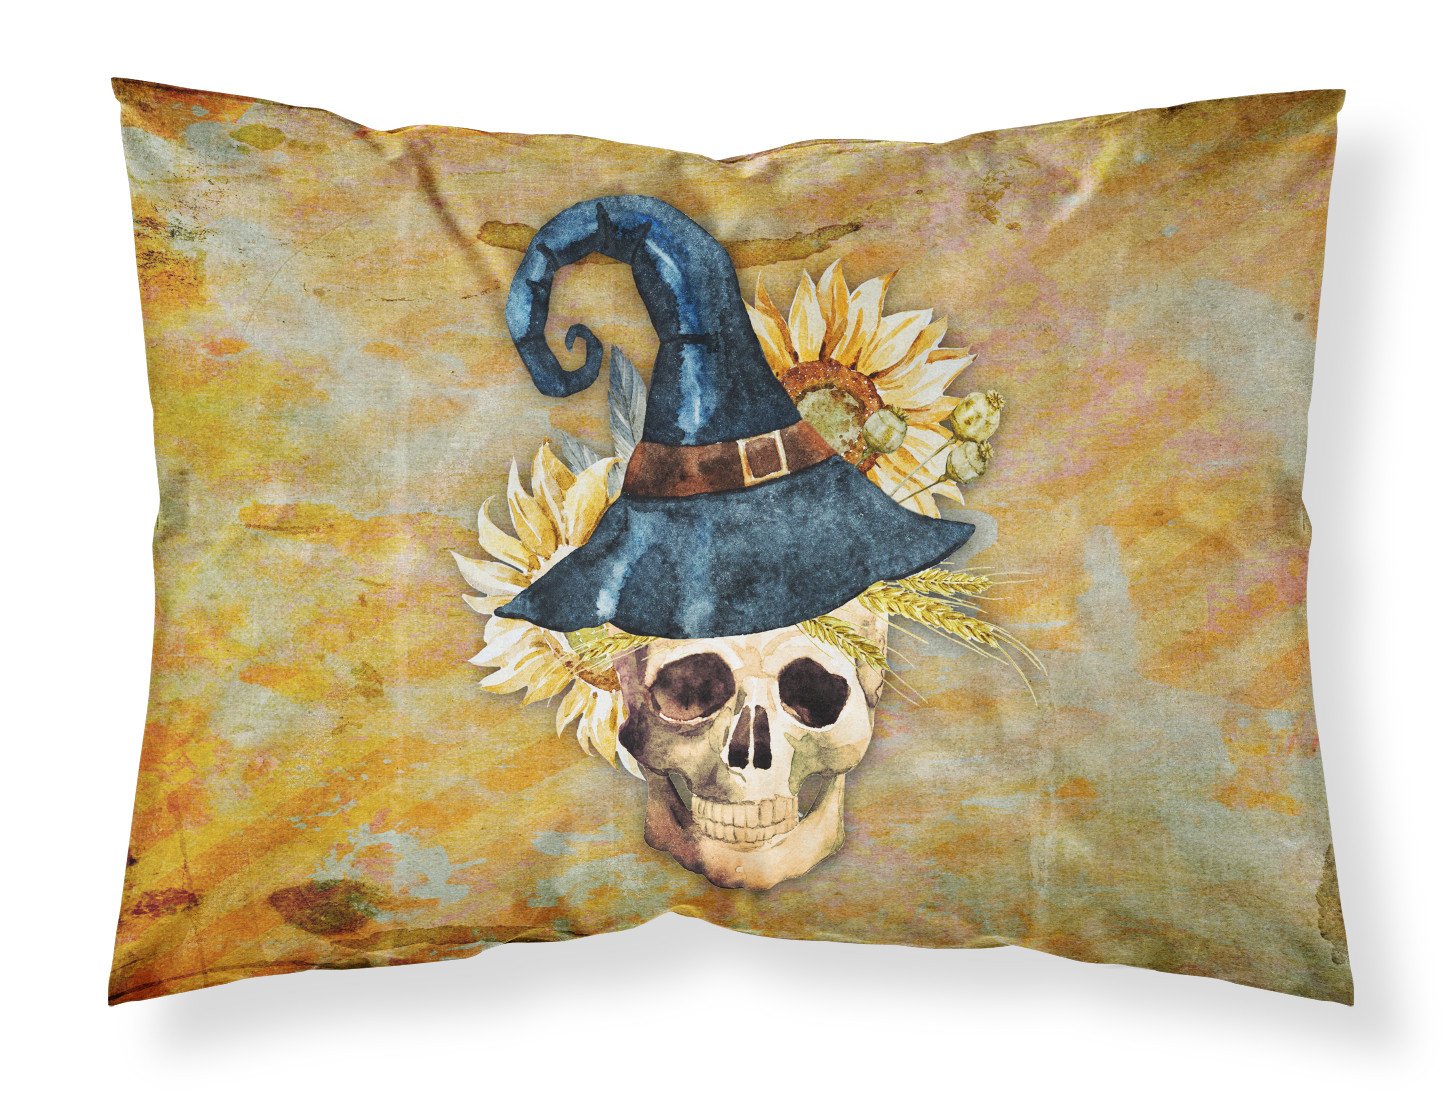 Day of the Dead Witch Skull  Fabric Standard Pillowcase BB5126PILLOWCASE by Caroline's Treasures